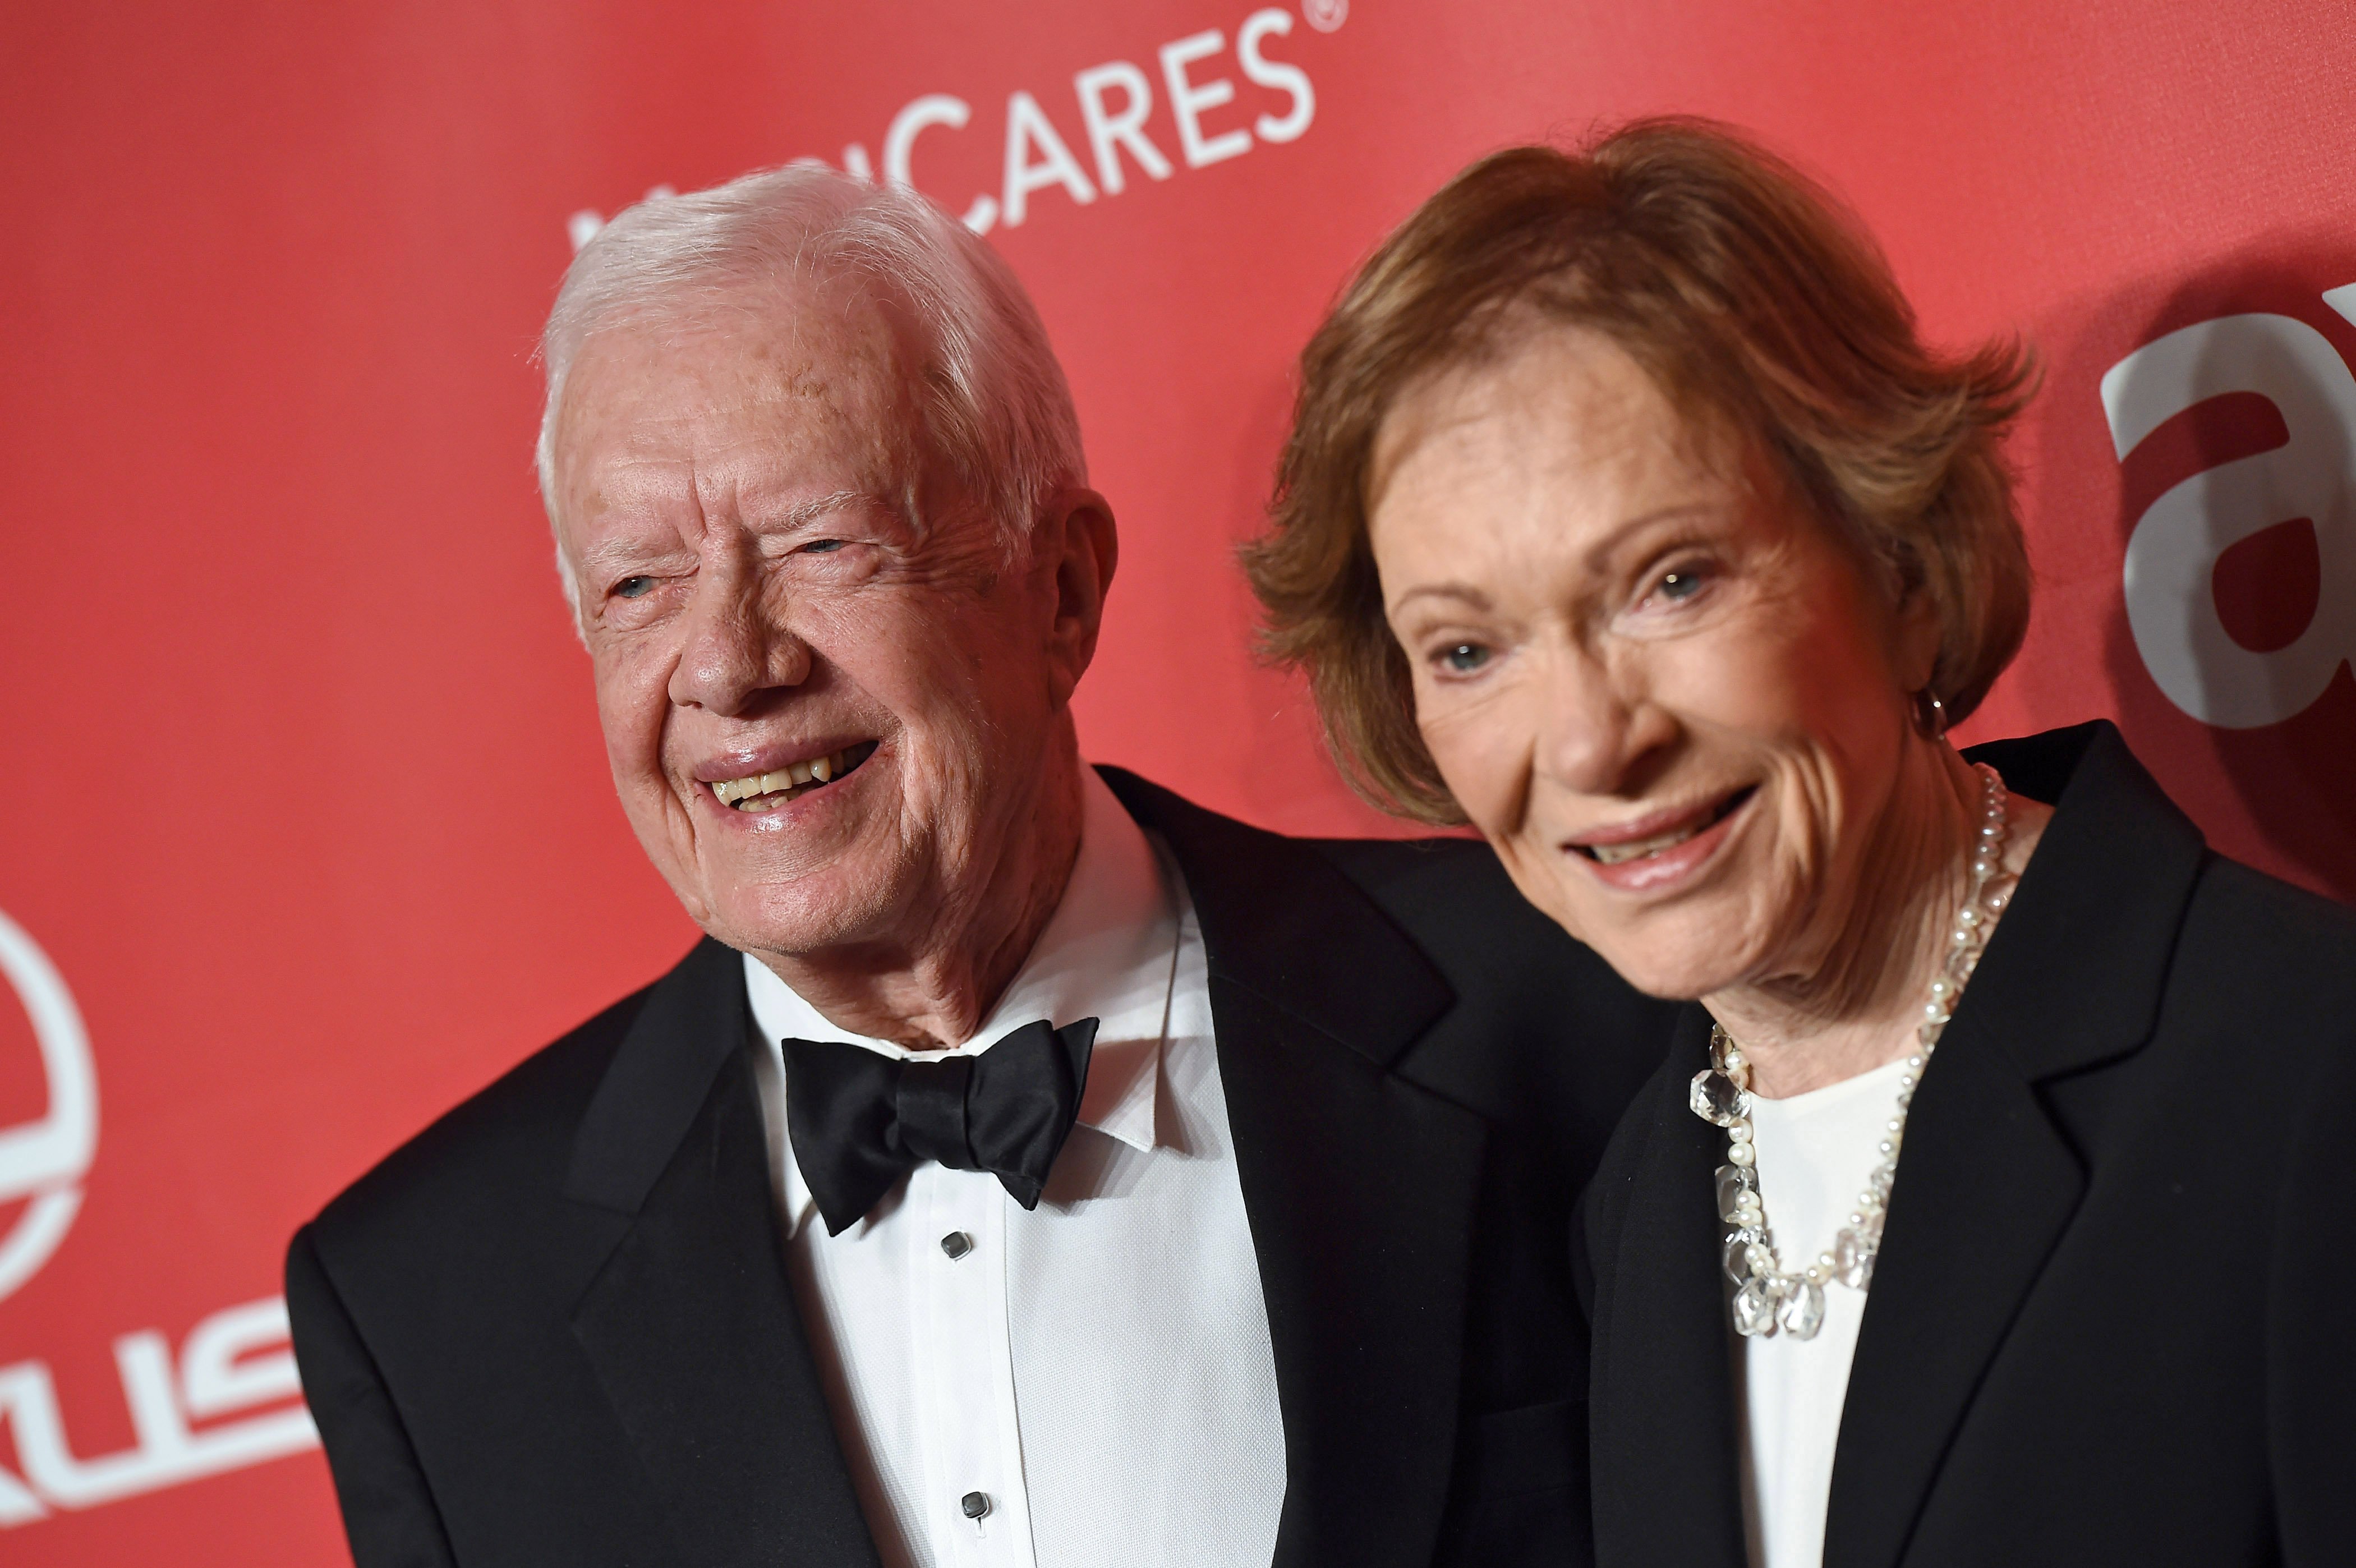 Former President Jimmy Carter and wife Rosalynn Carter on February 6, 2015 in Los Angeles, California. | Source: Getty Images